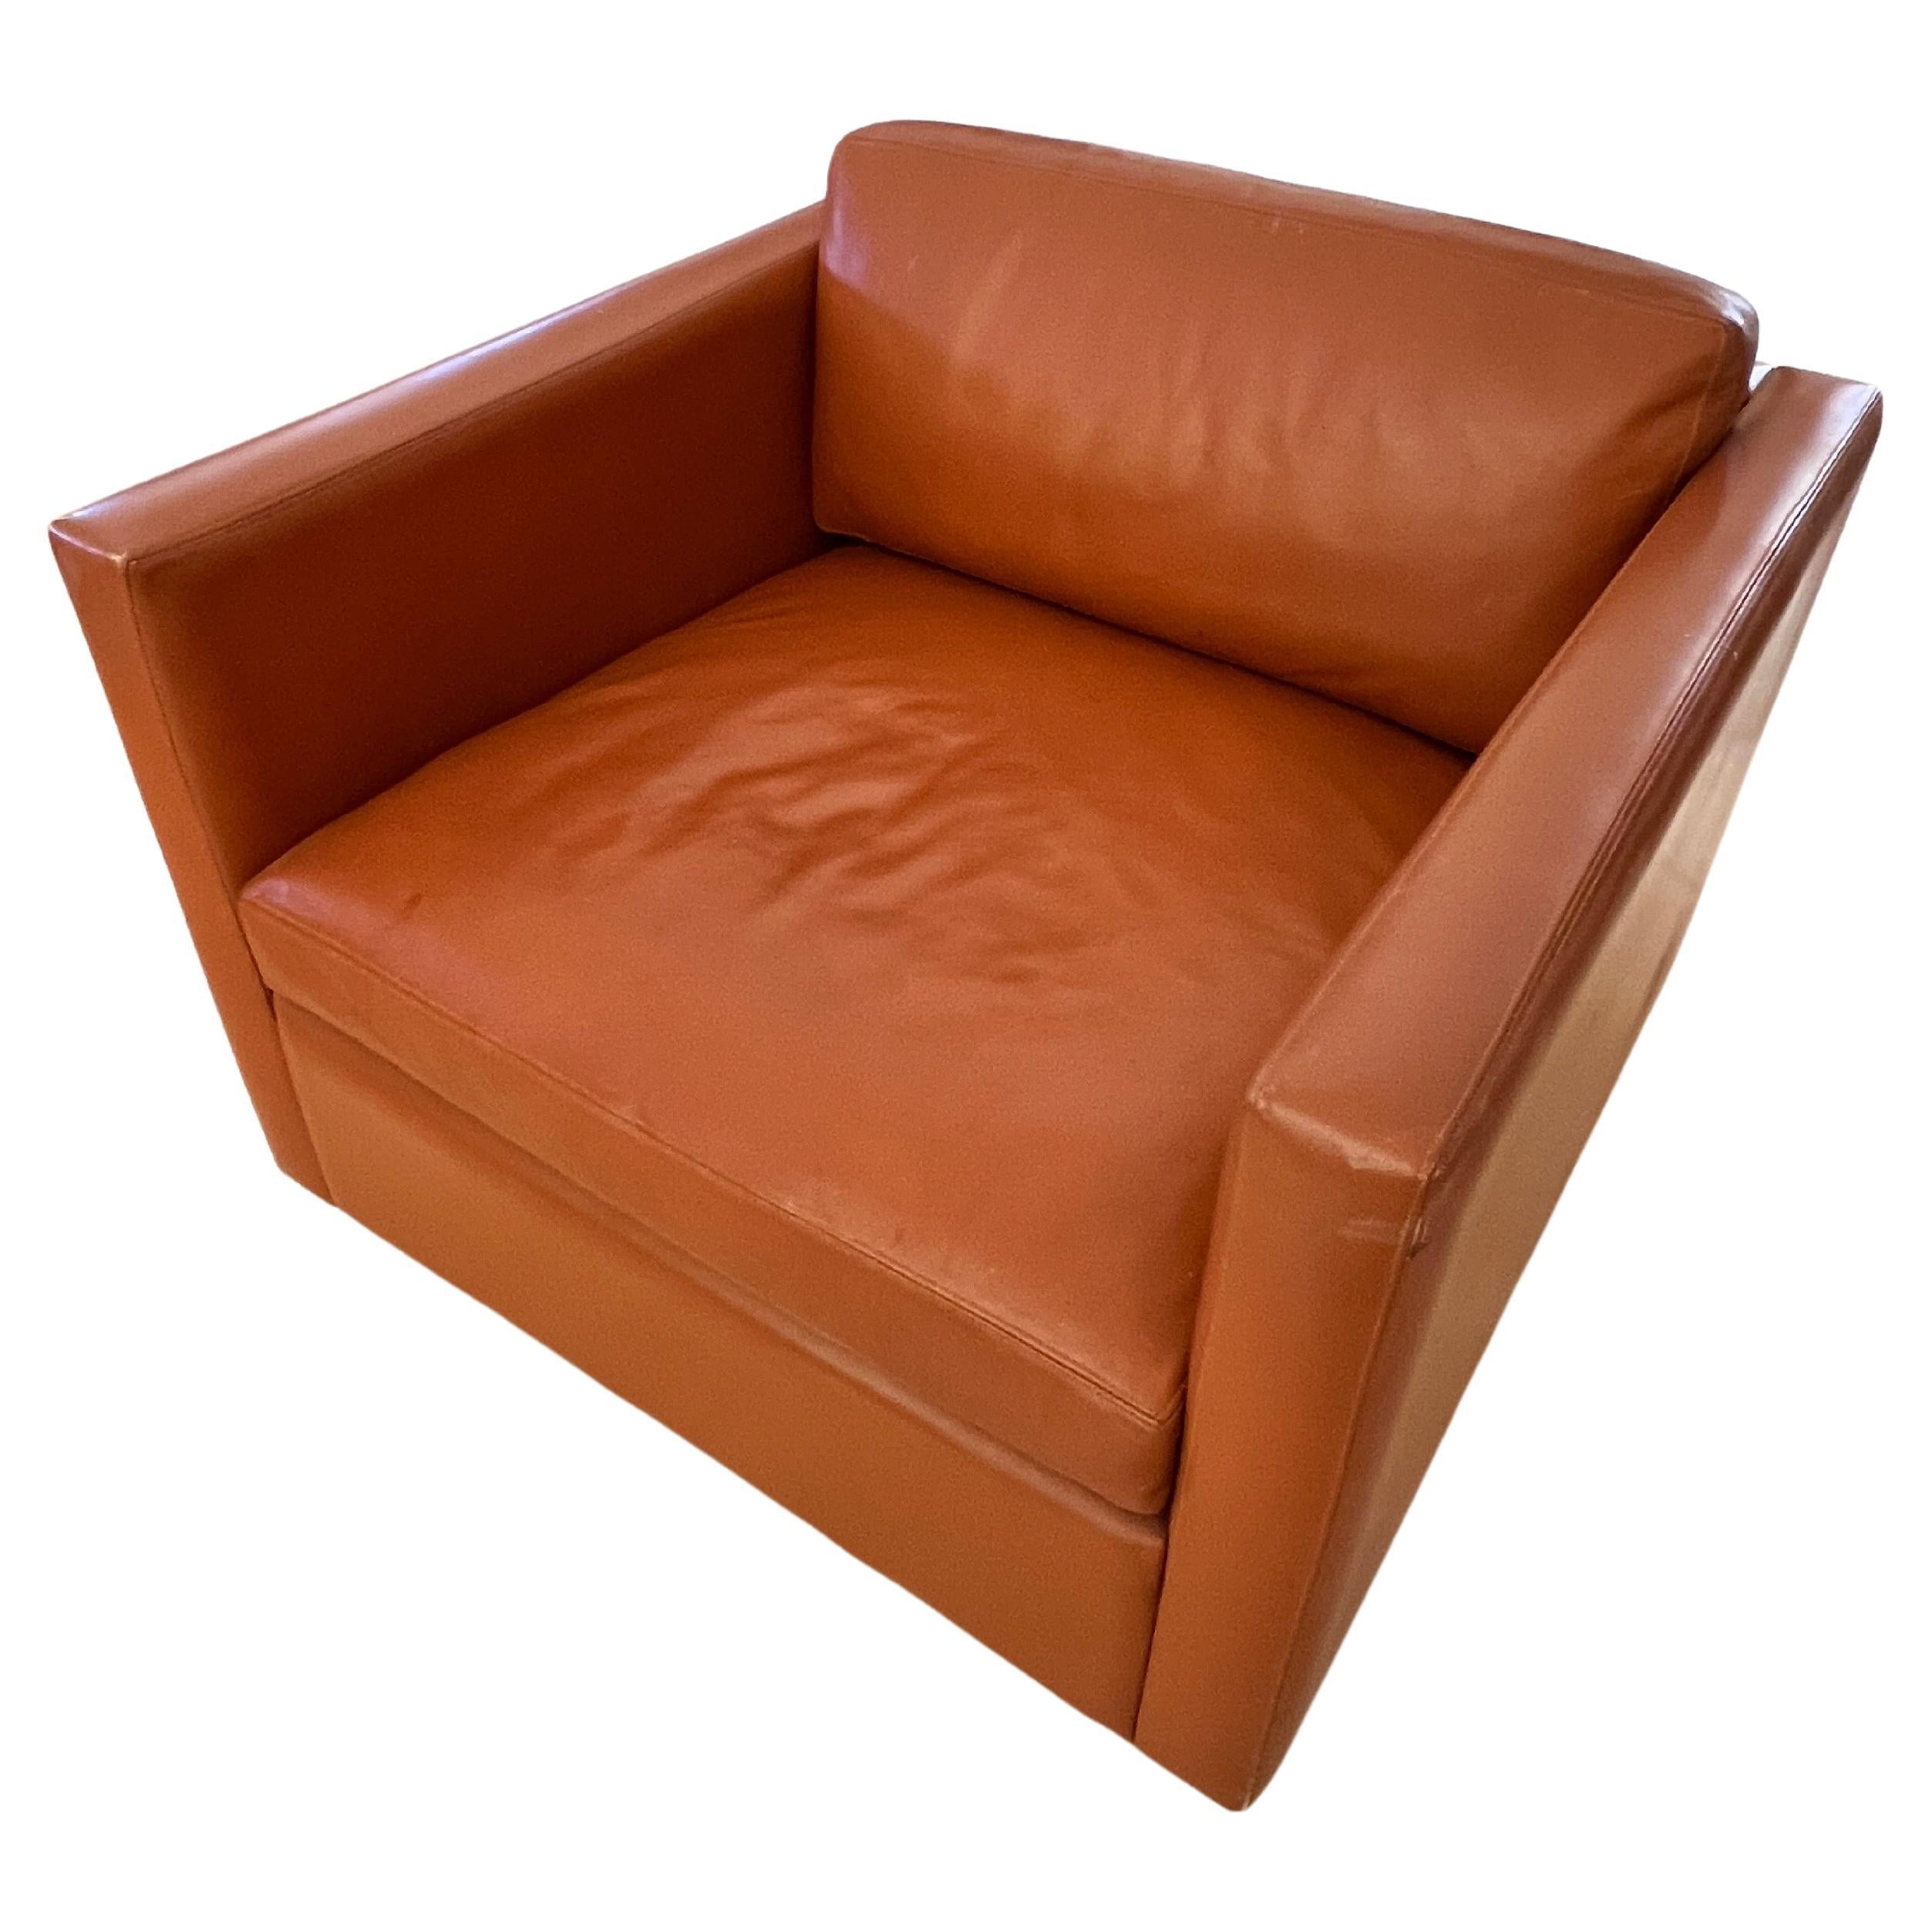 Knoll Cube Lounge Chair by Charles Pfister 1971 Original Sabrina Leather, #1 For Sale